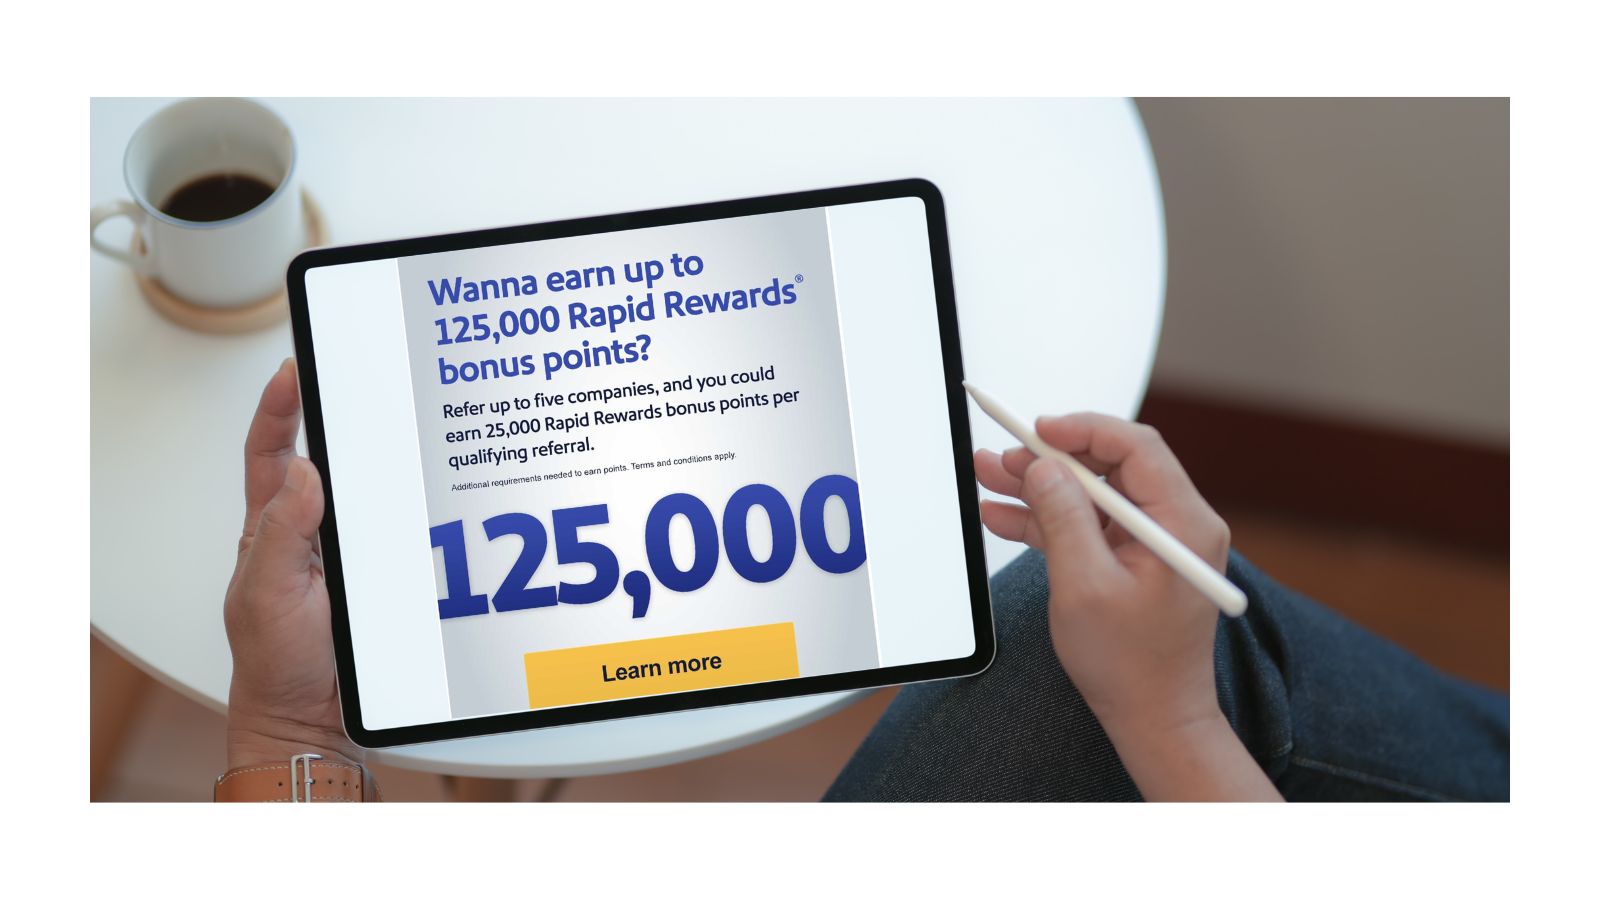 Get up to 125K Southwest points without a credit card (SWABIZ promo gets better)